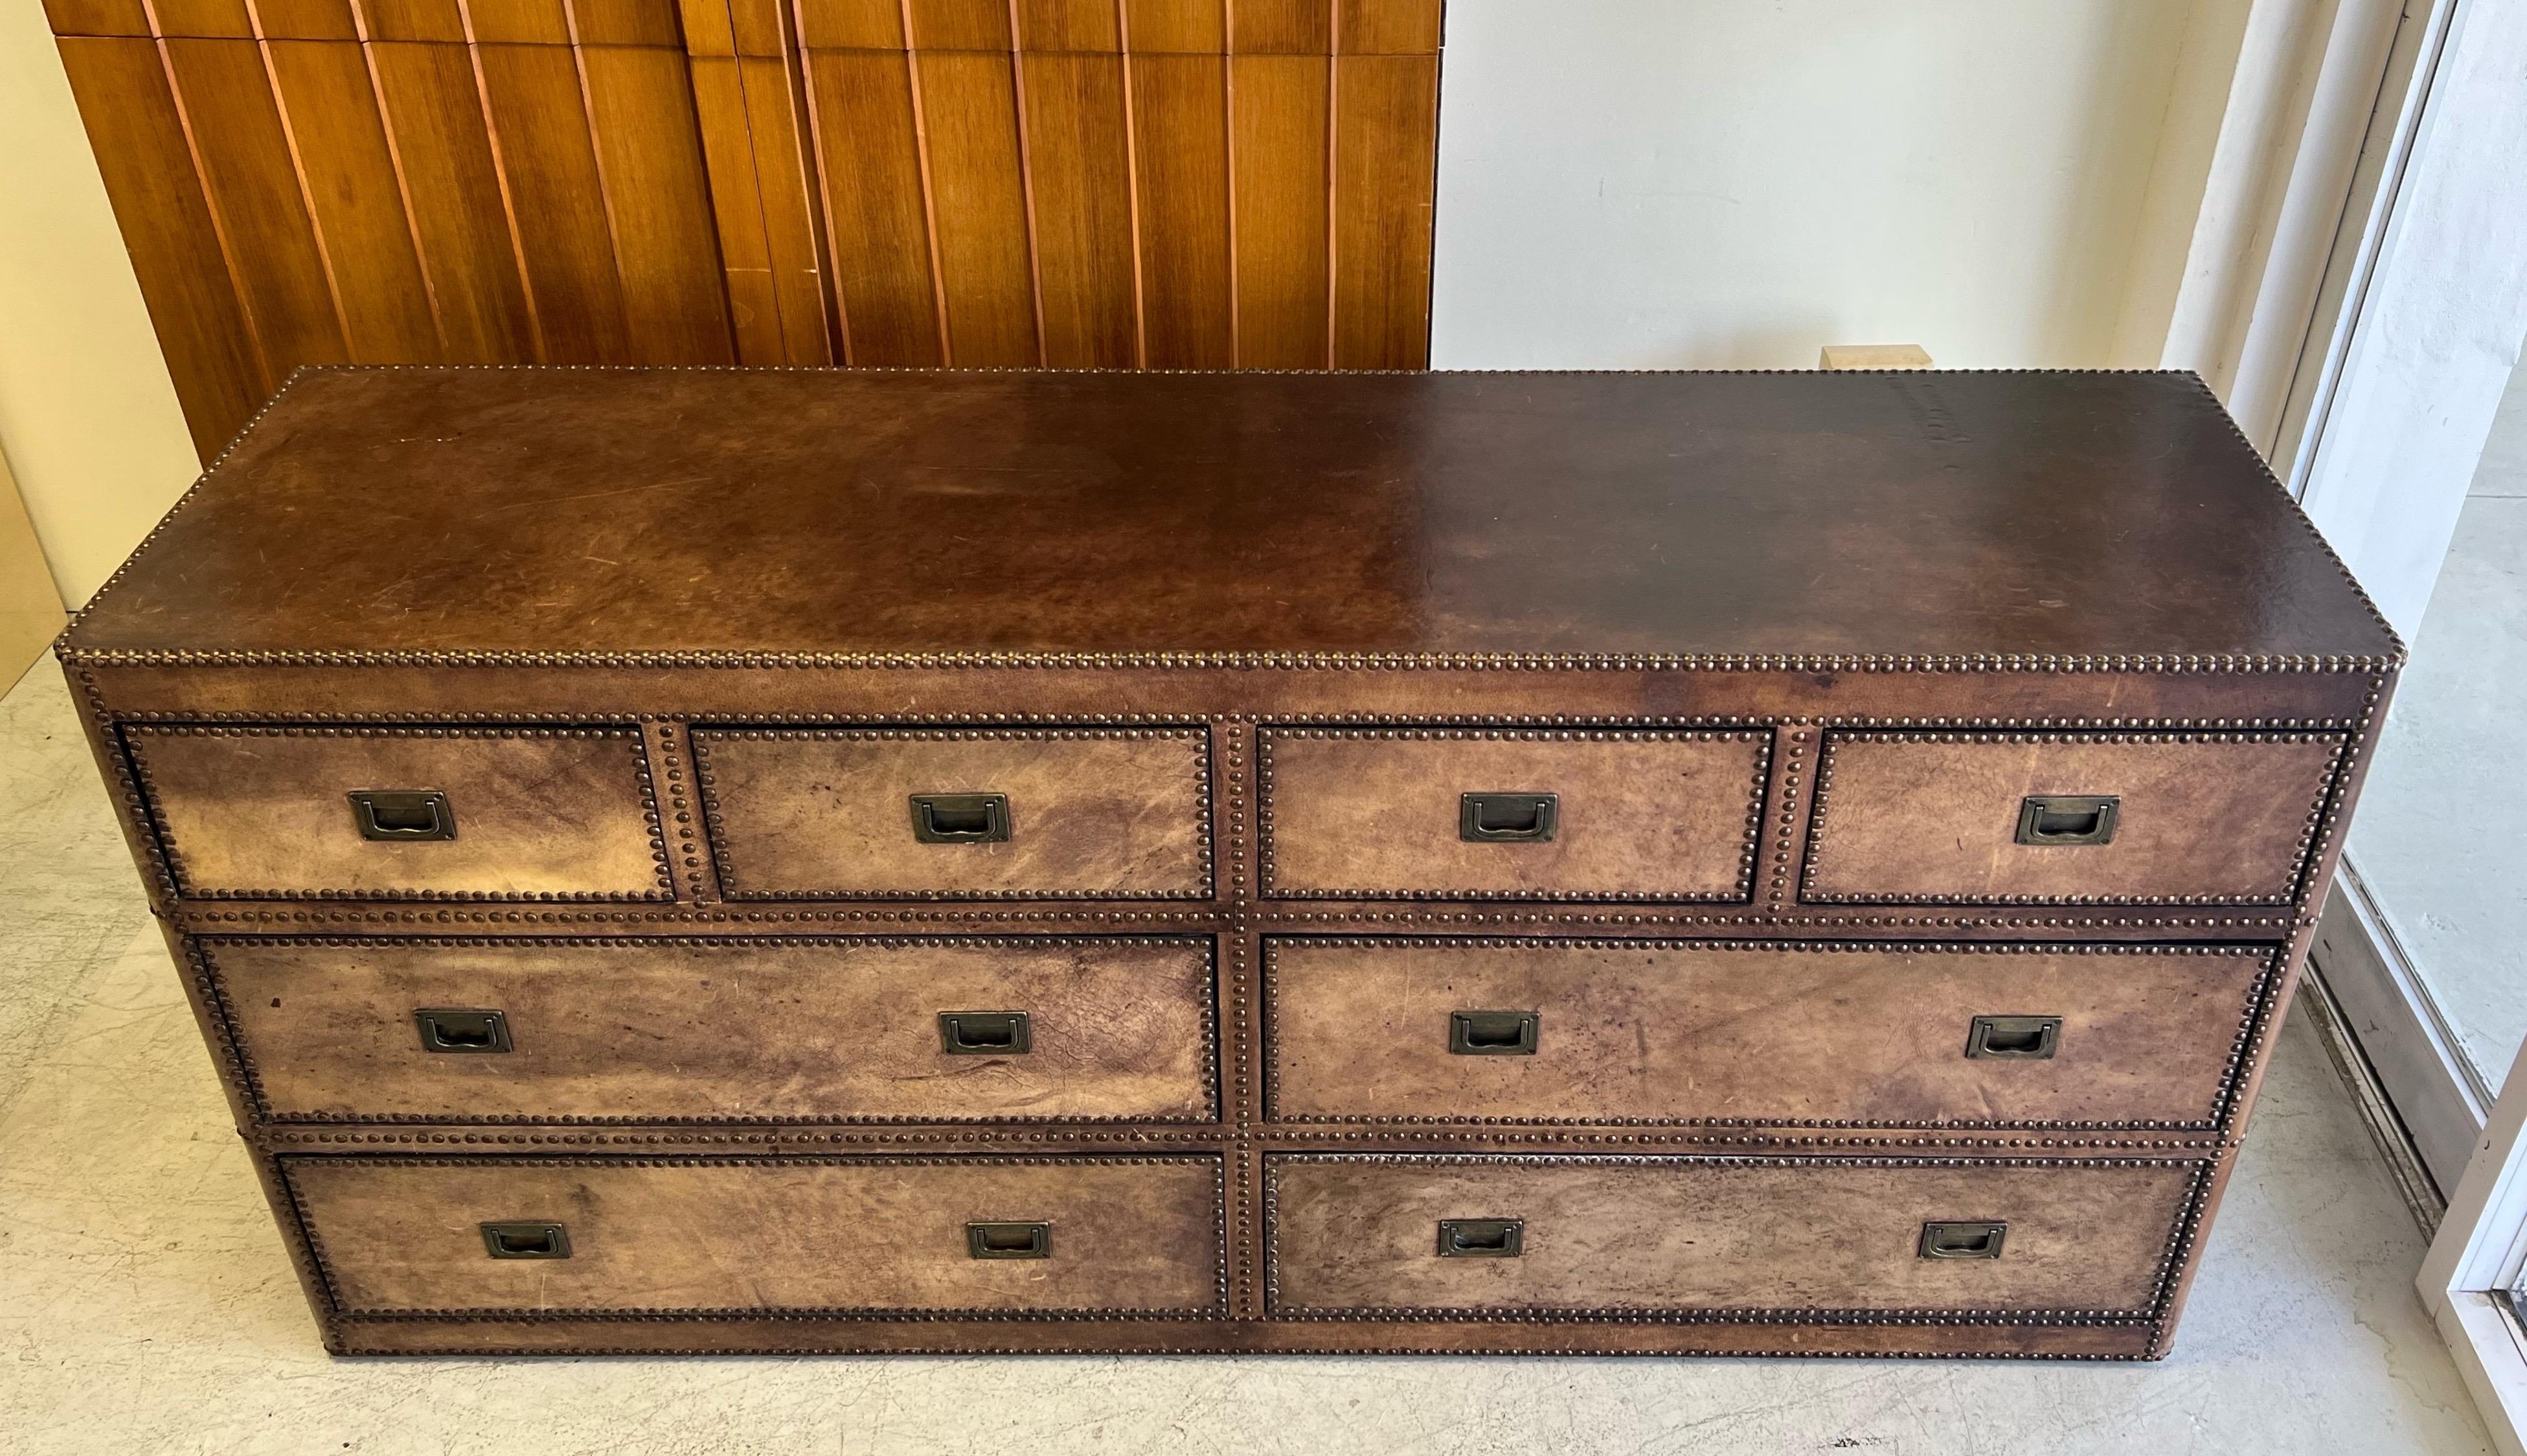 A leather clad cabinet with tacks on all edges. Even the back is done in leather. The cabinet is on casters. The interior of the drawers in done in black paint. Lots of storage.